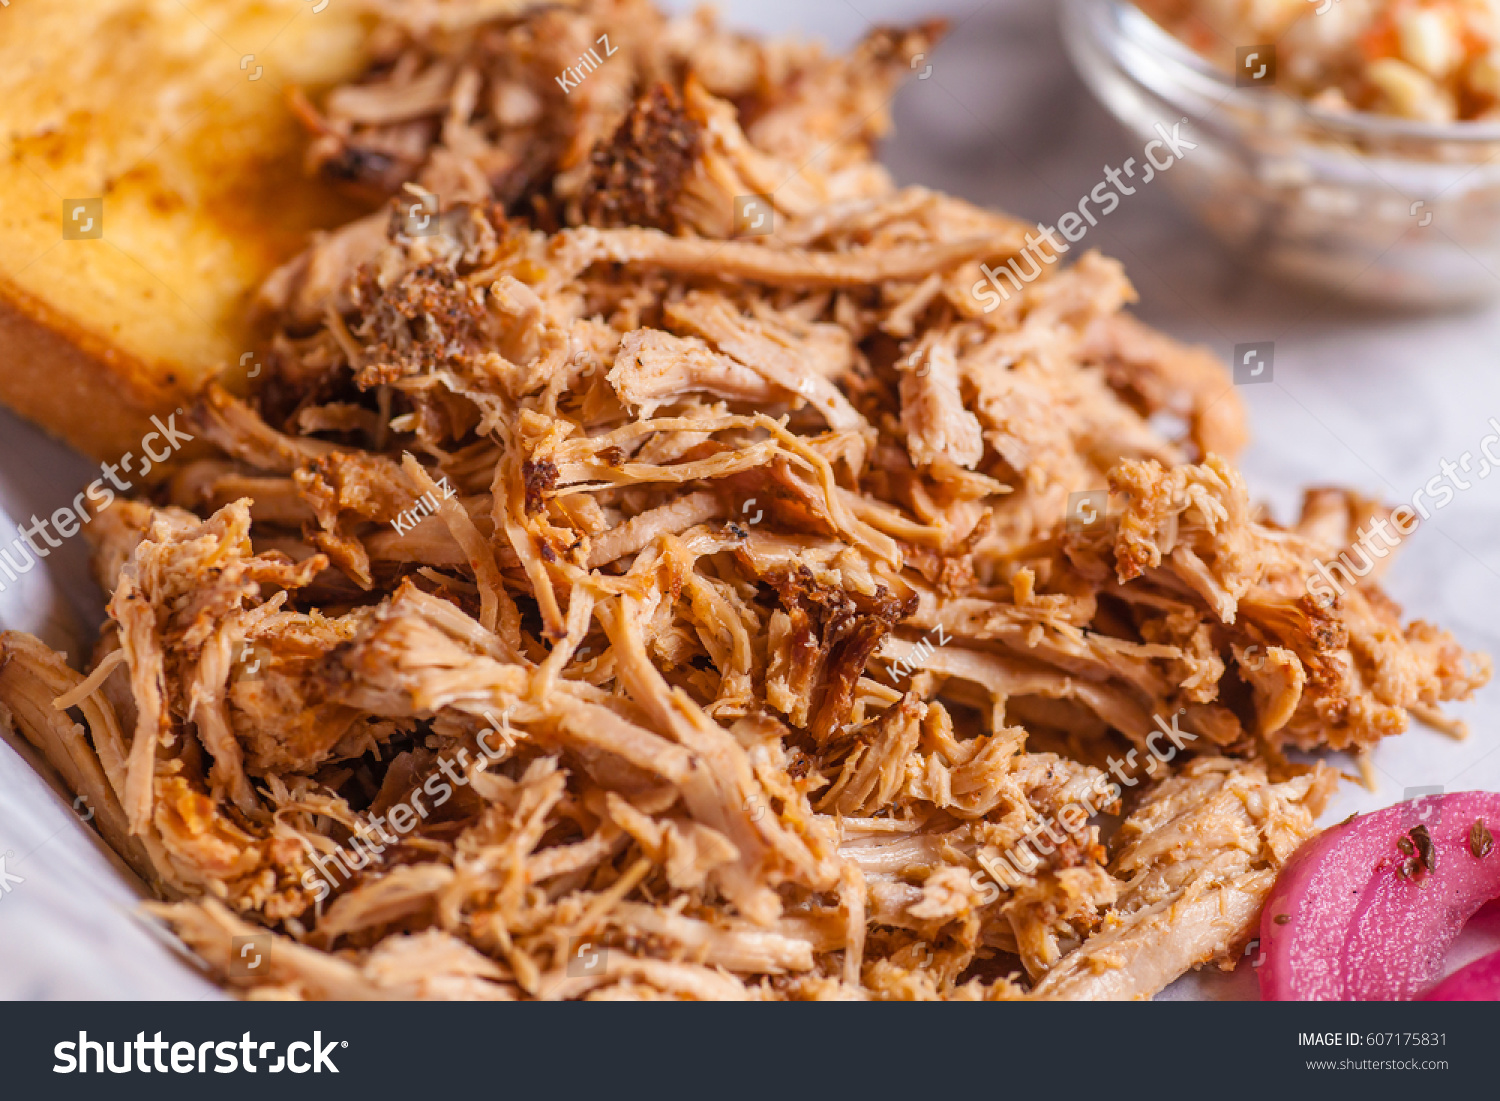 Close up shot of pulled pork fibers in a sandwich freshy served on a platter #607175831